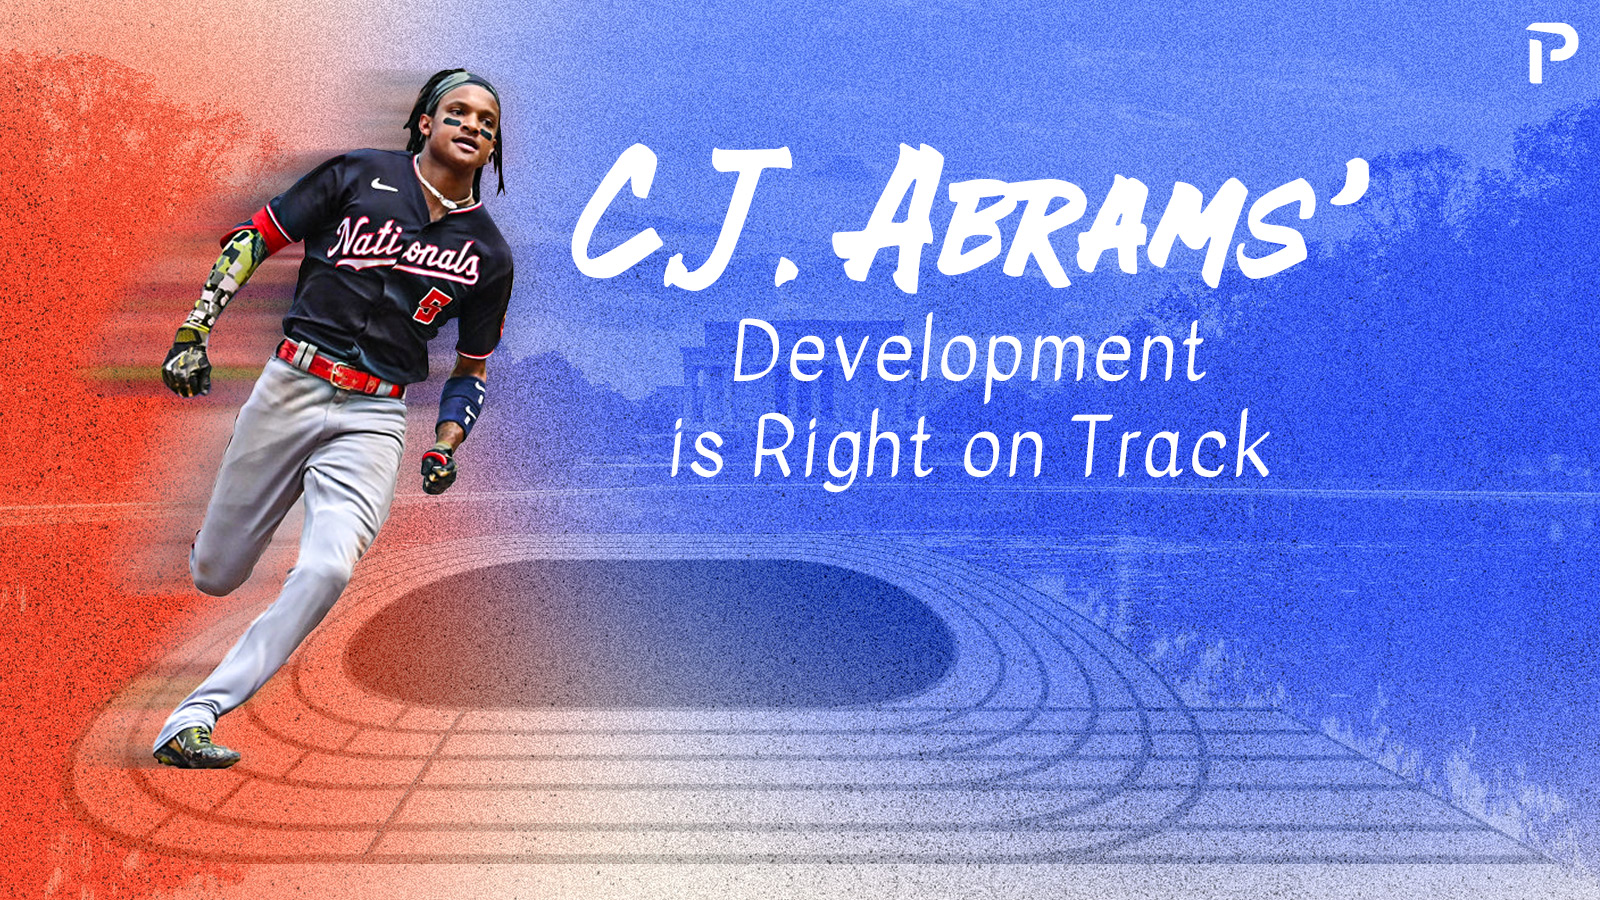 CJ Abrams named National League Player of the Week